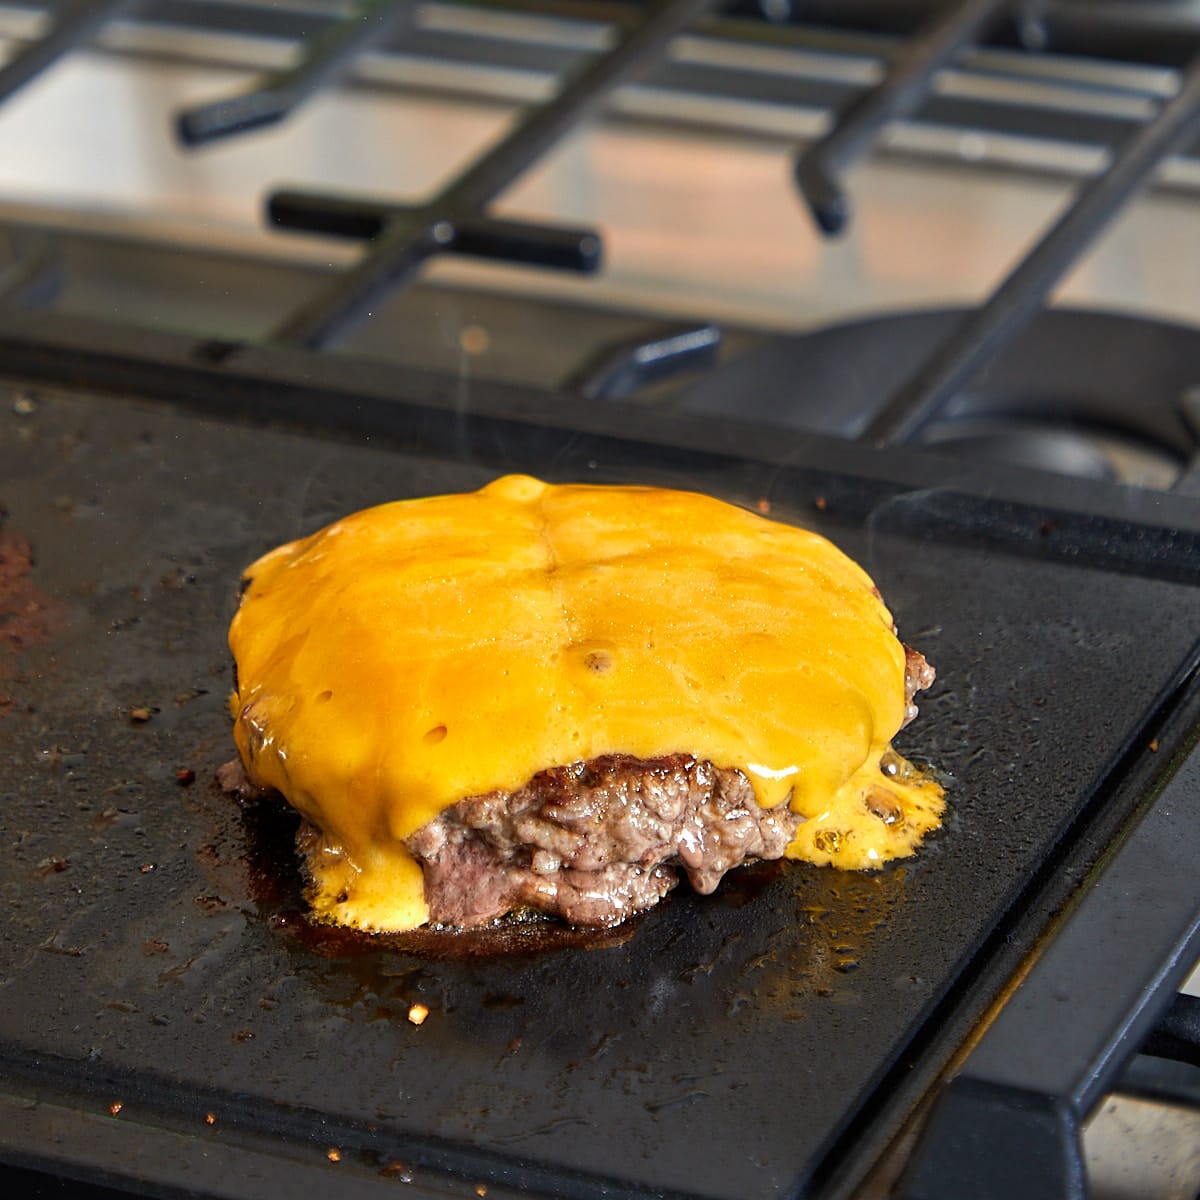 cheese melting on a burger patty as it is being grilled.